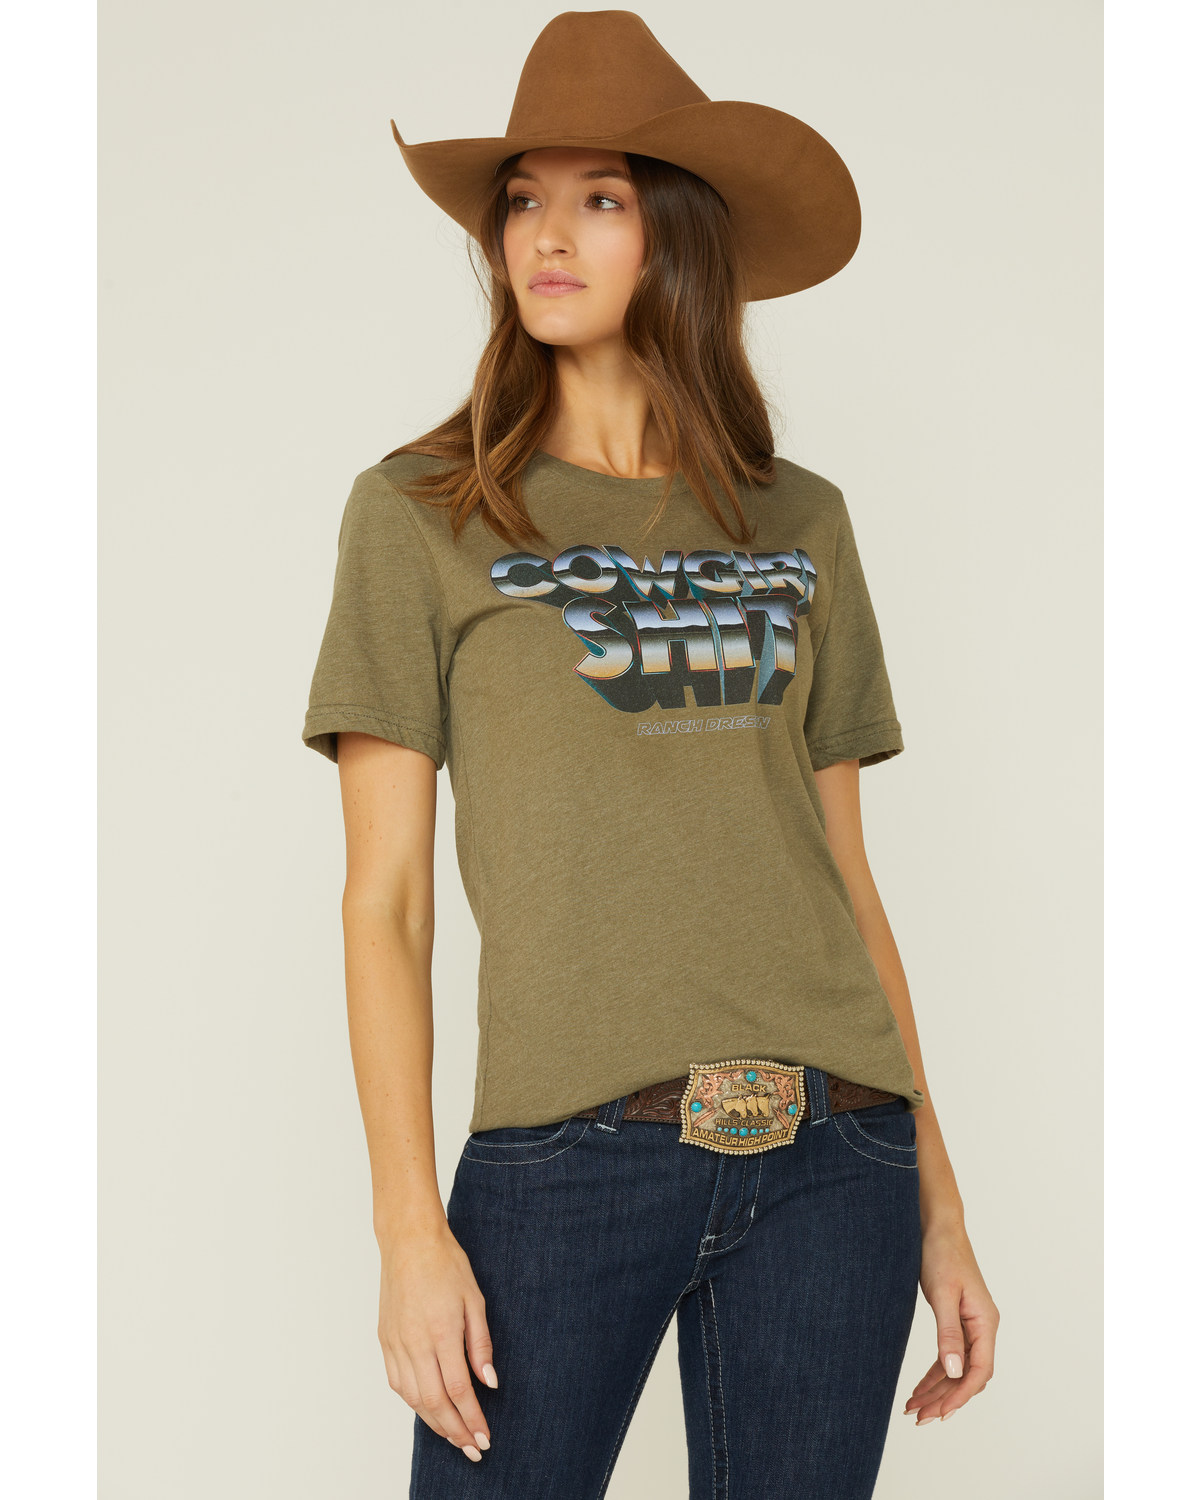 Ranch Dress'n Women's Cowgirl Graphic Tee